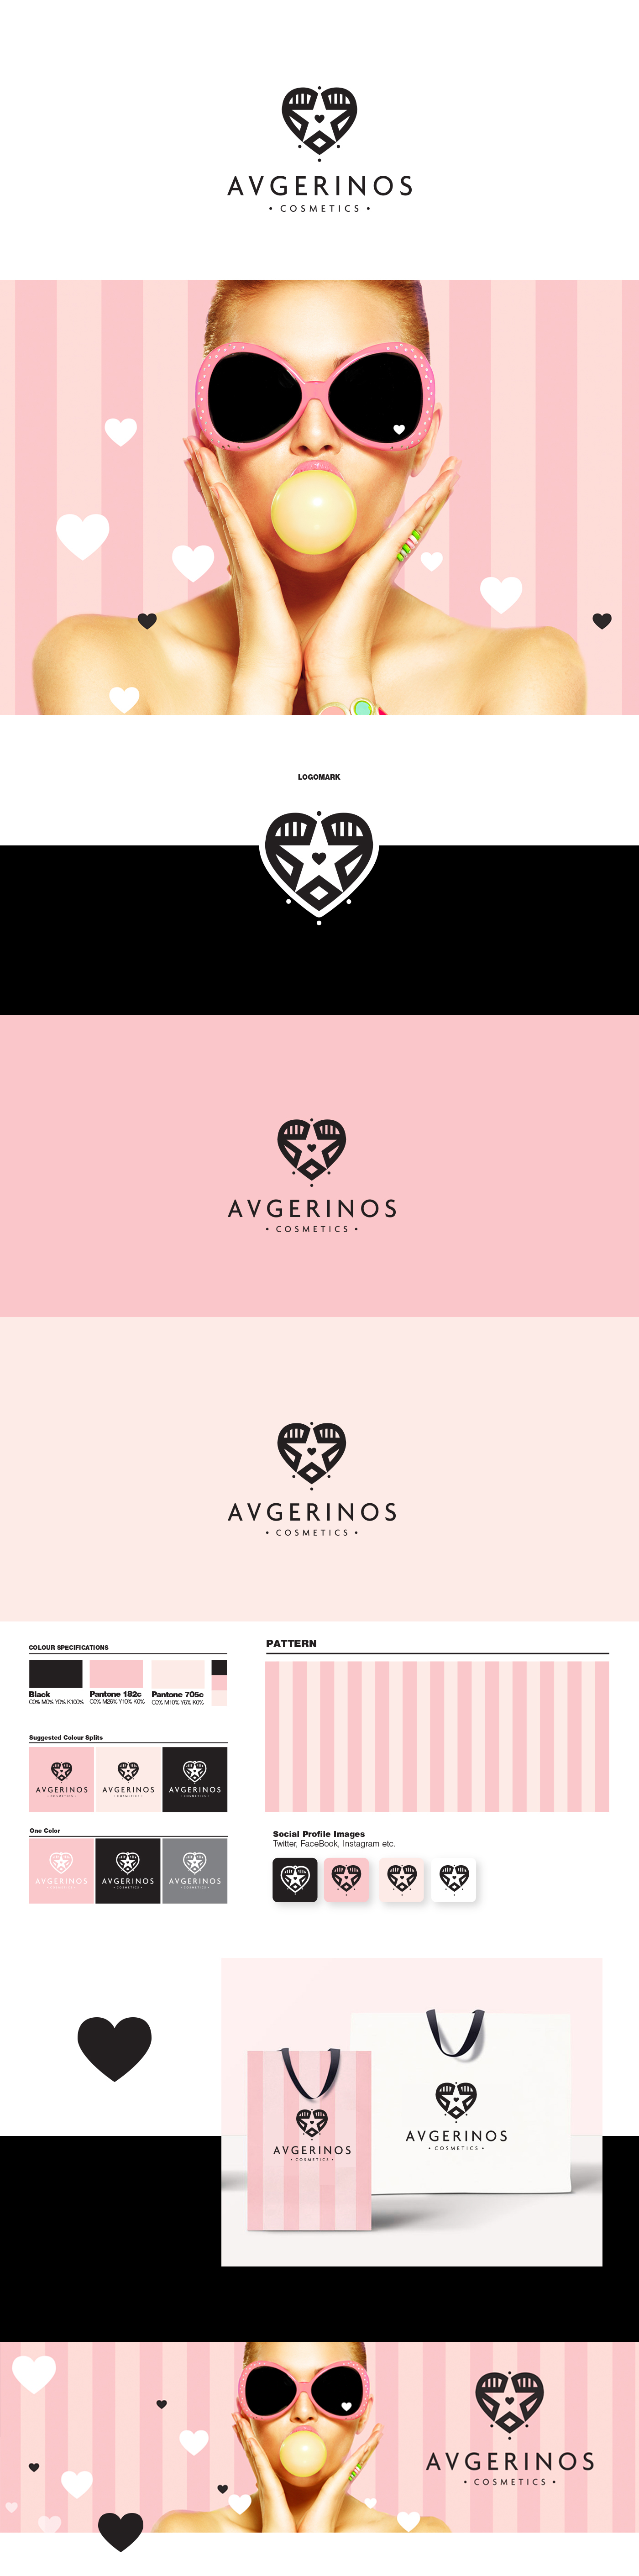 avgerinos cosmetics products beauty DAWN star heart Greece pink bubble